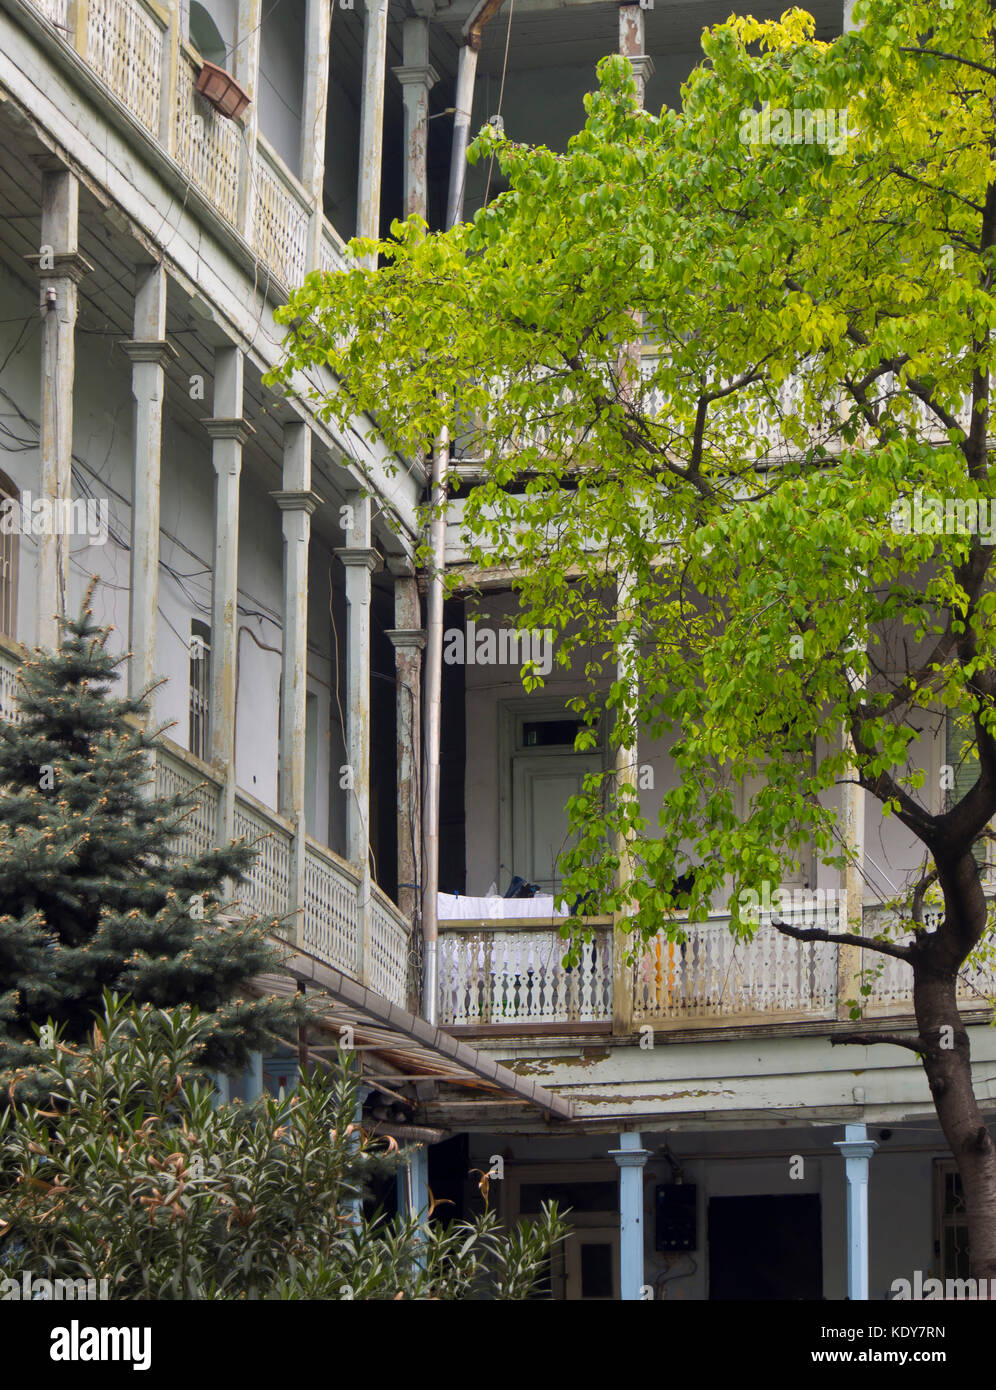 Detail of traditional Georgian architecture in the capital Tbilisi, wooden balustrades Stock Photo